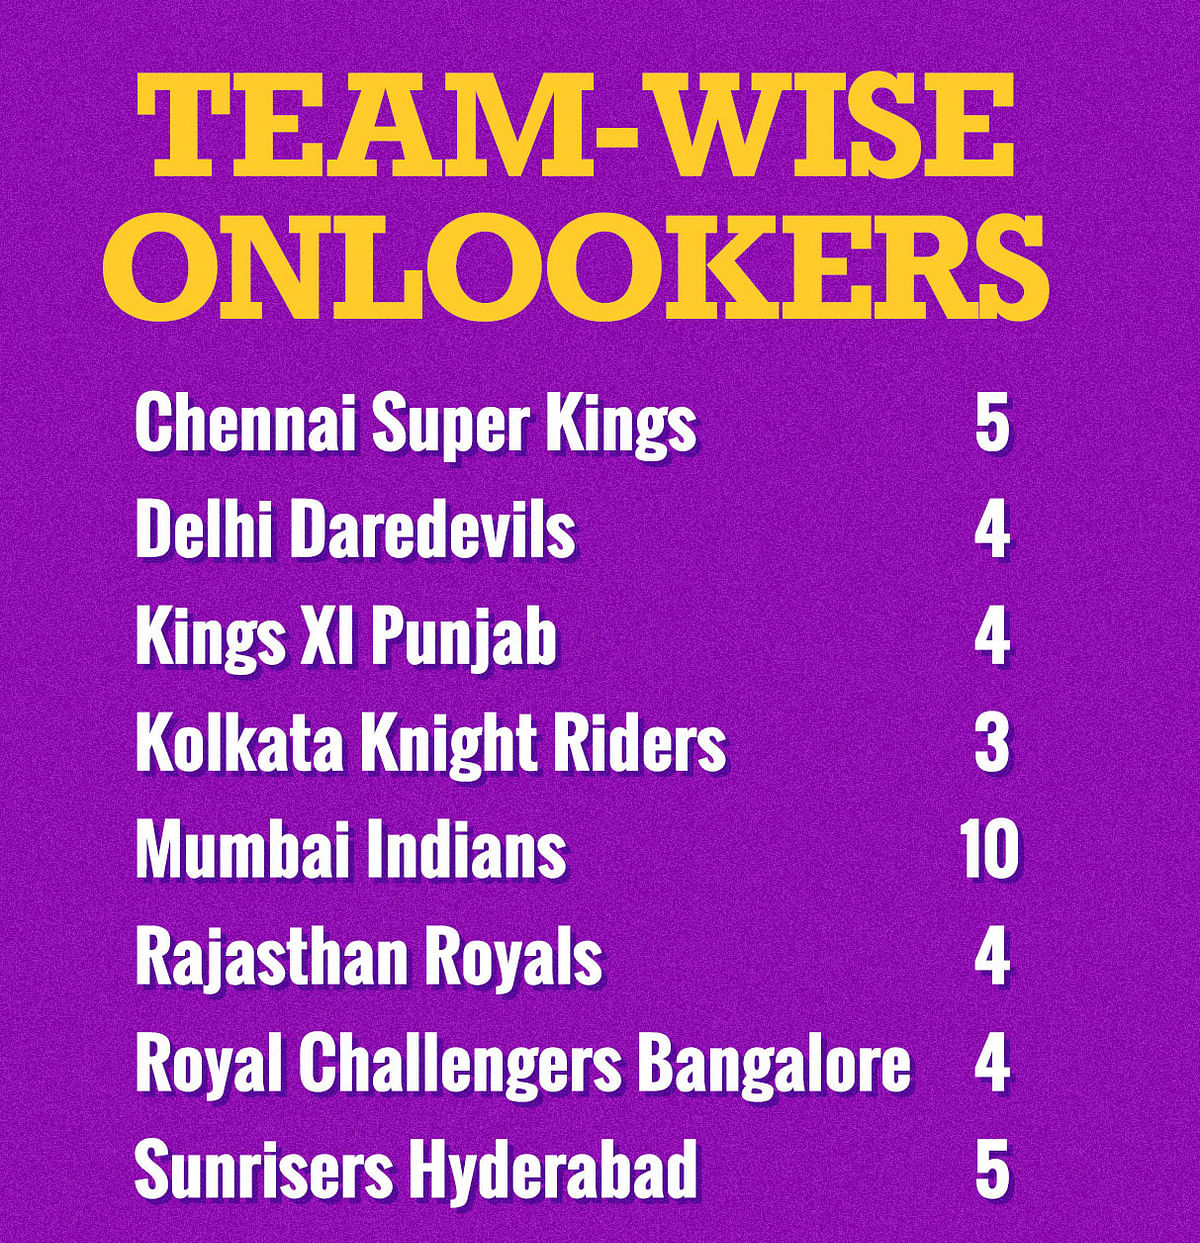 In IPL 2018, 39 cricketers had to be content with just being onlookers or drinks-carriers.